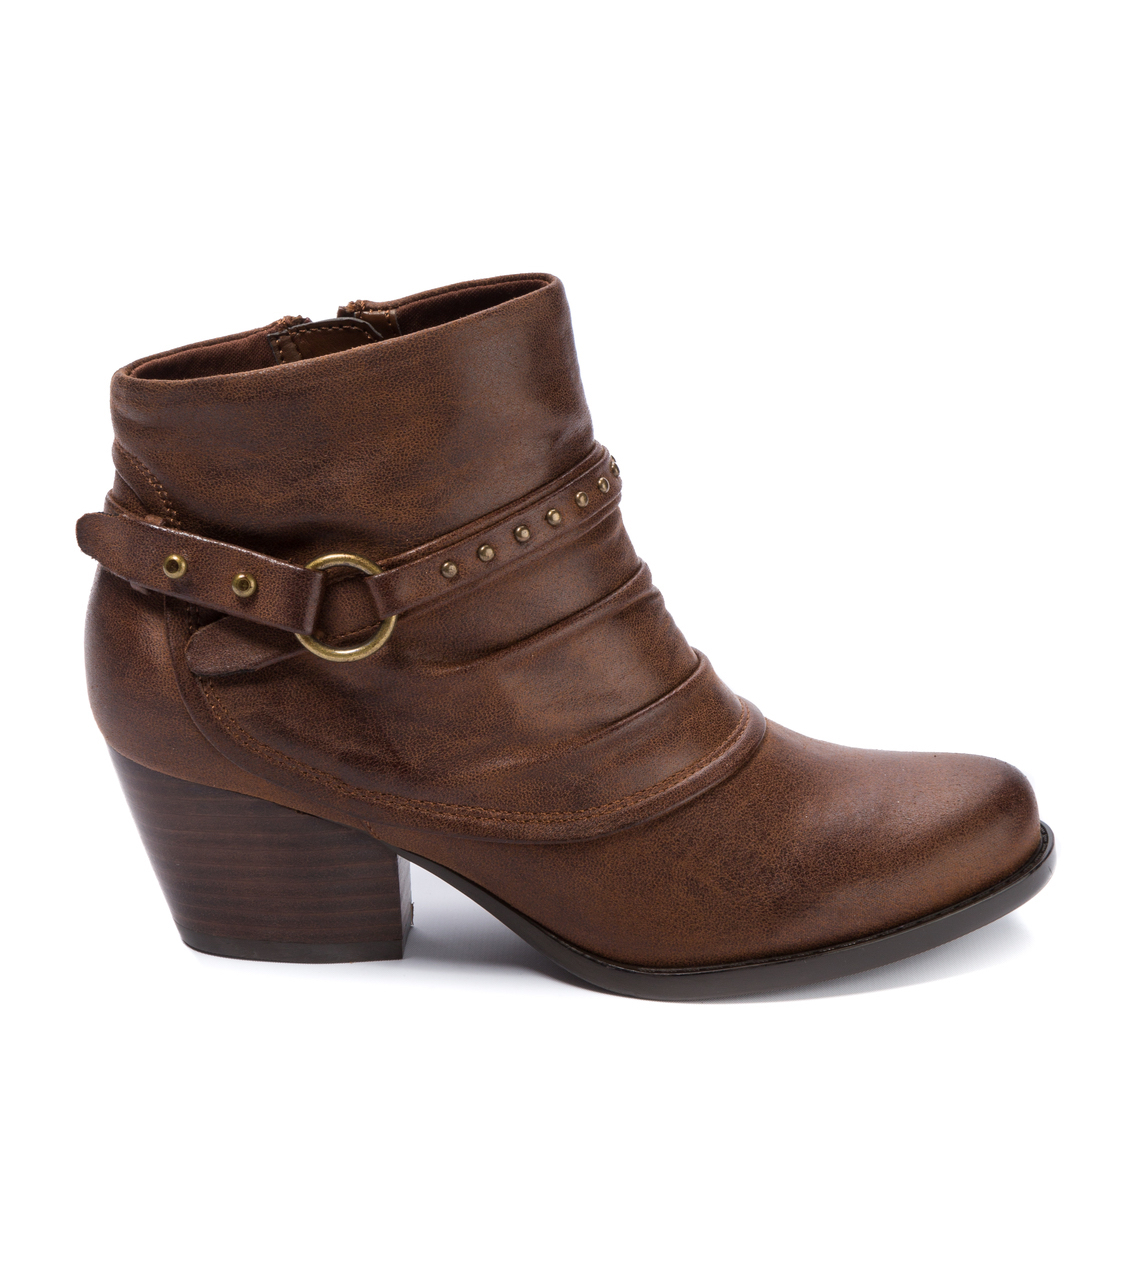 Bare Traps Womens Rosea Almond Toe Ankle Fashion Boots, Brush Brown ...